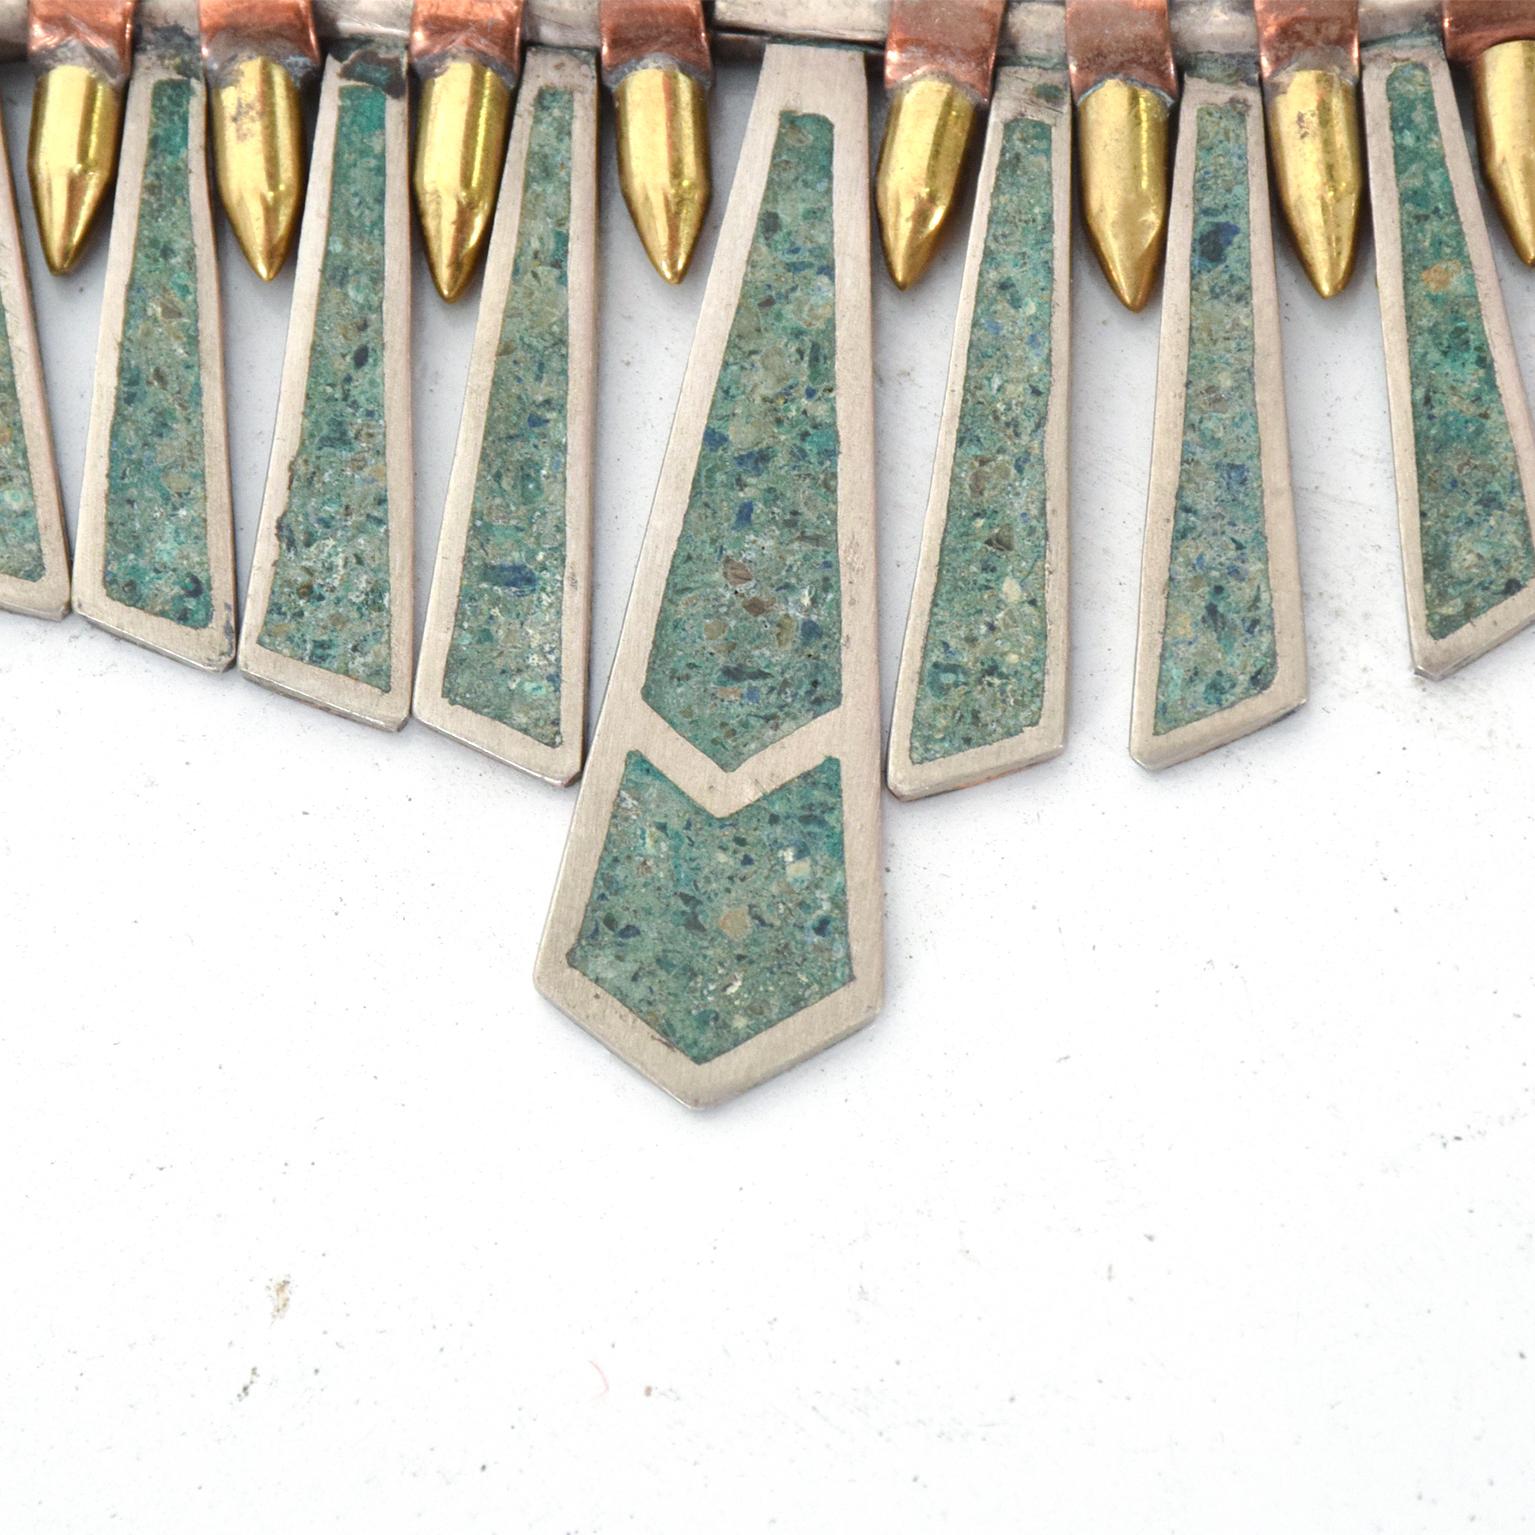 For your consideration: Vintage mosaic choker necklace in a fringe spike bib collar design, made in Mexico, circa 1960s.
Stunning Mexican modernism necklace Art in malachite metal mix
Unmarked. Similar to work of Los Castillo, designs of William